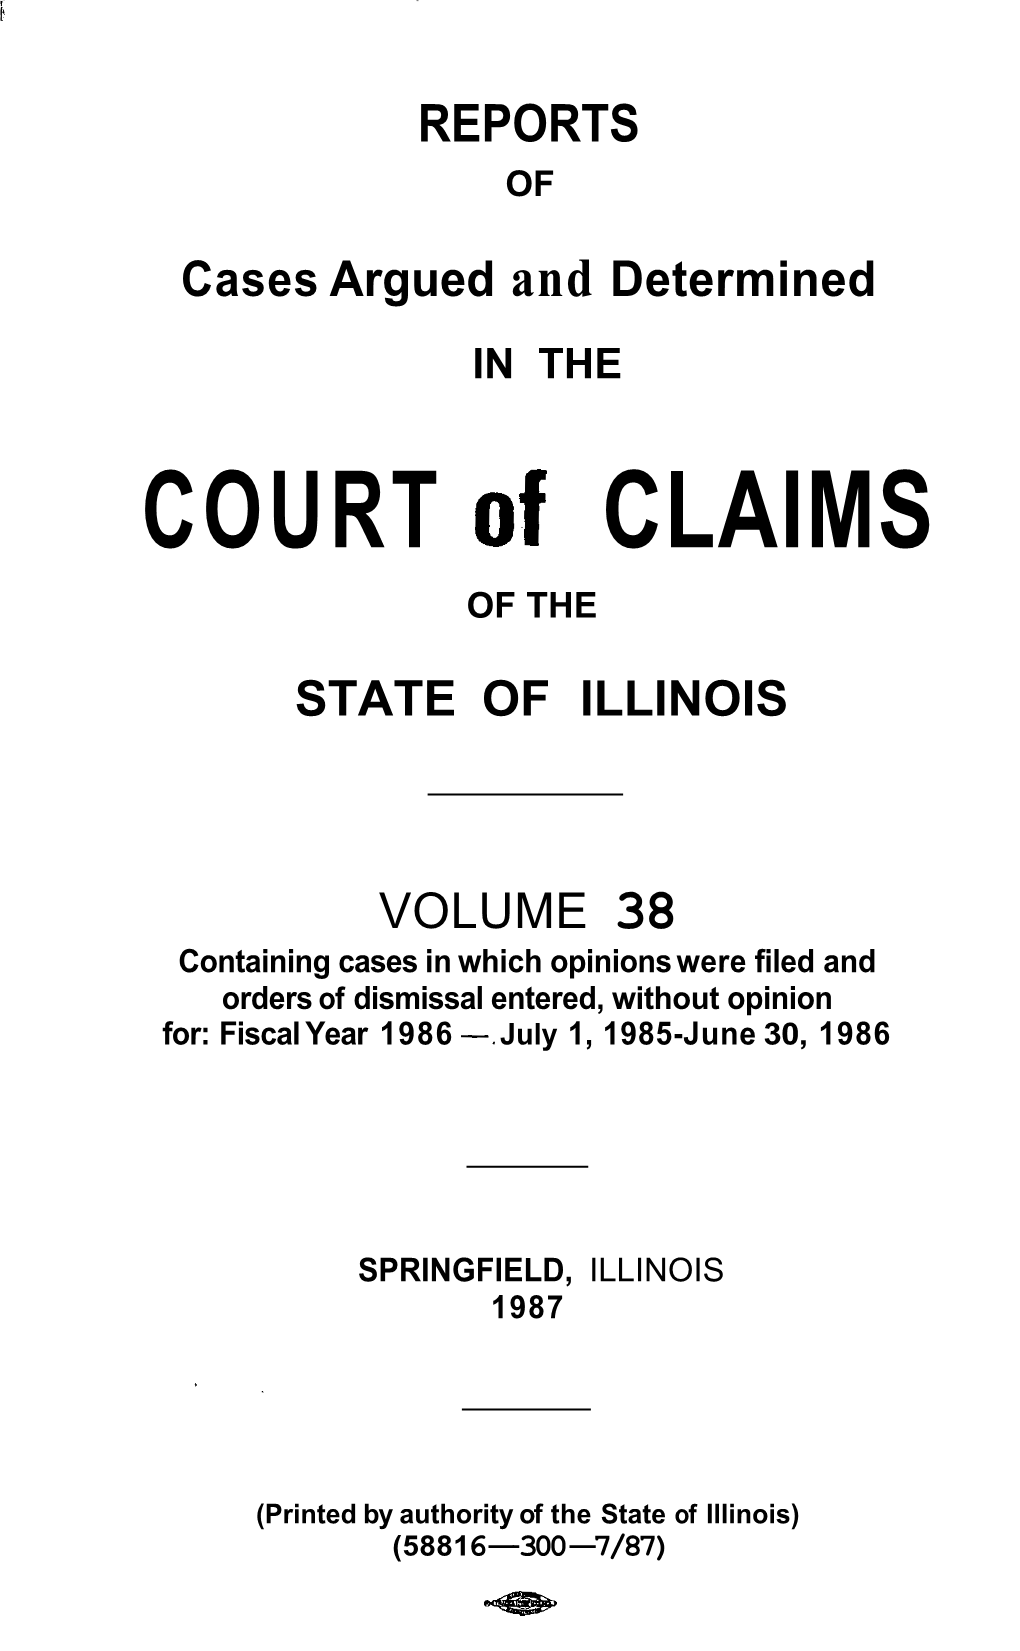 COURT of CLAIMS 1 of THE